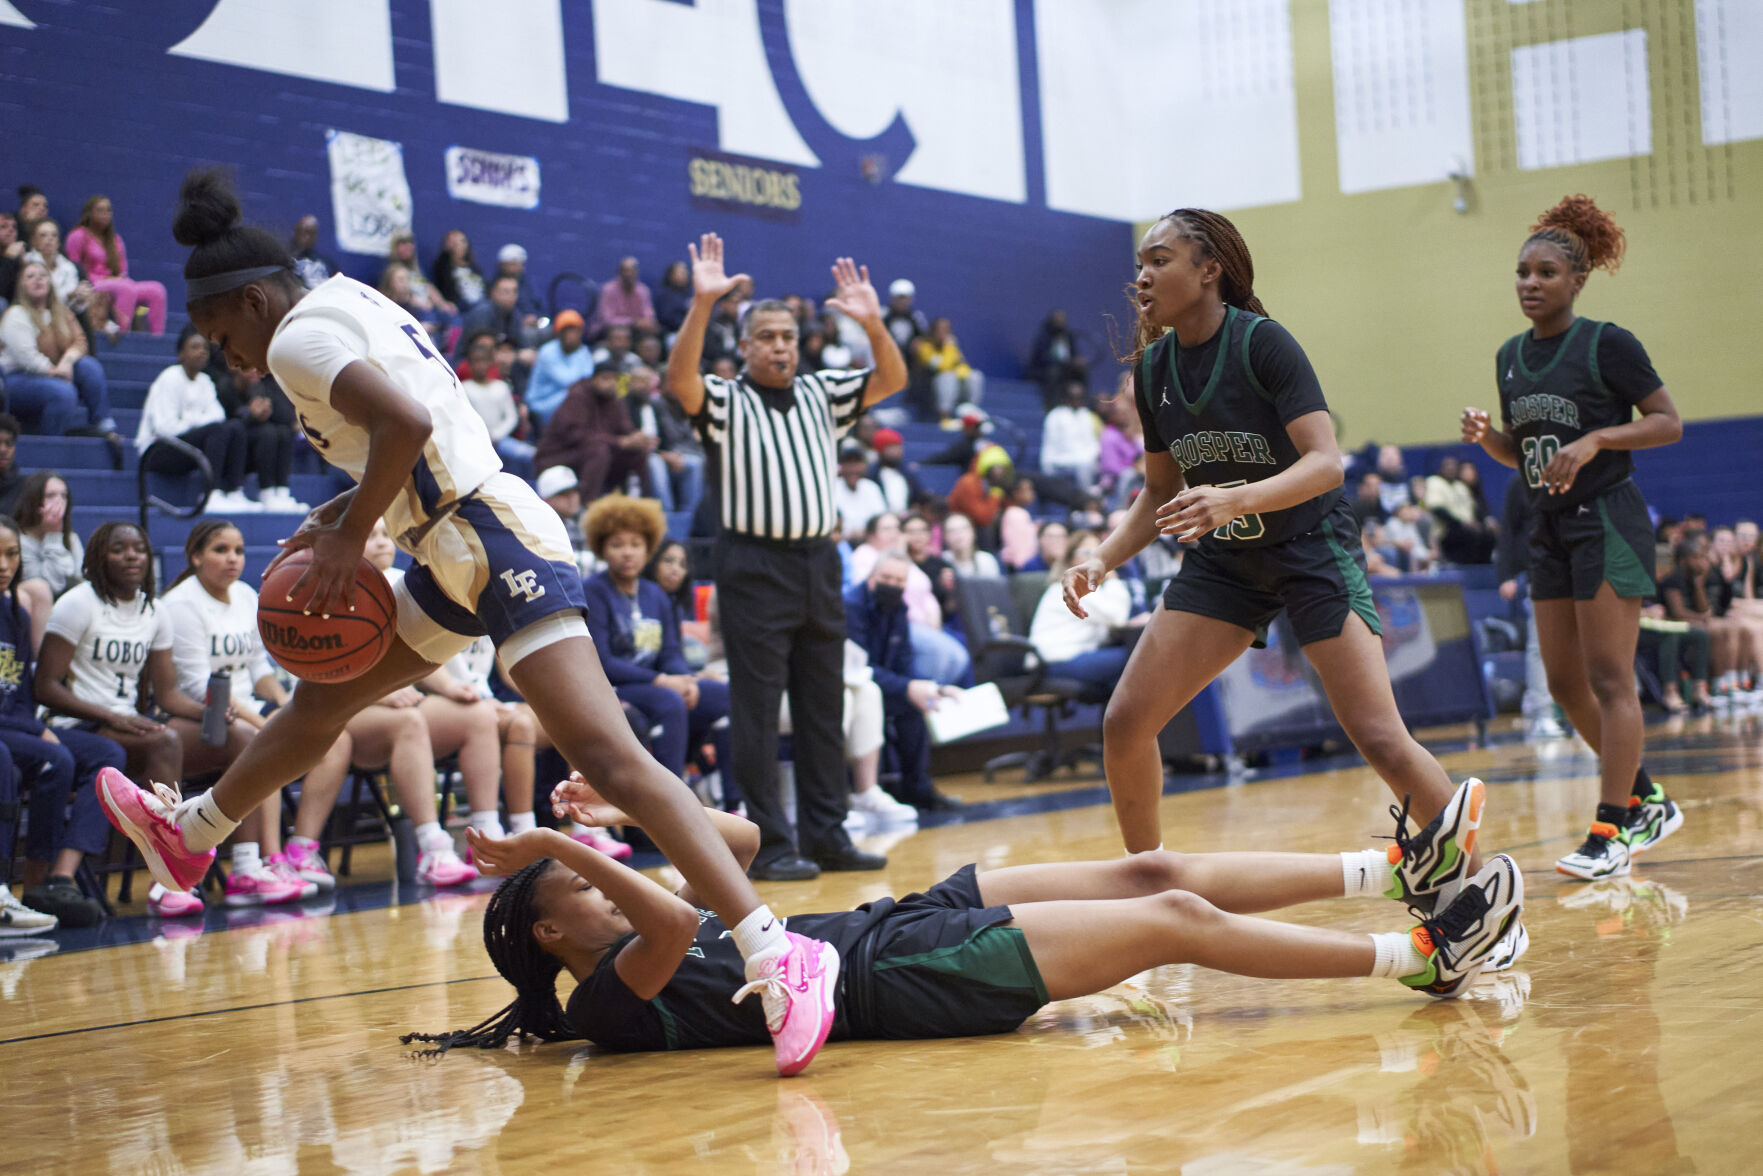 Madison Martin’s 23-point Performance Leads Little Elm to 68-60 Victory Against Prosper